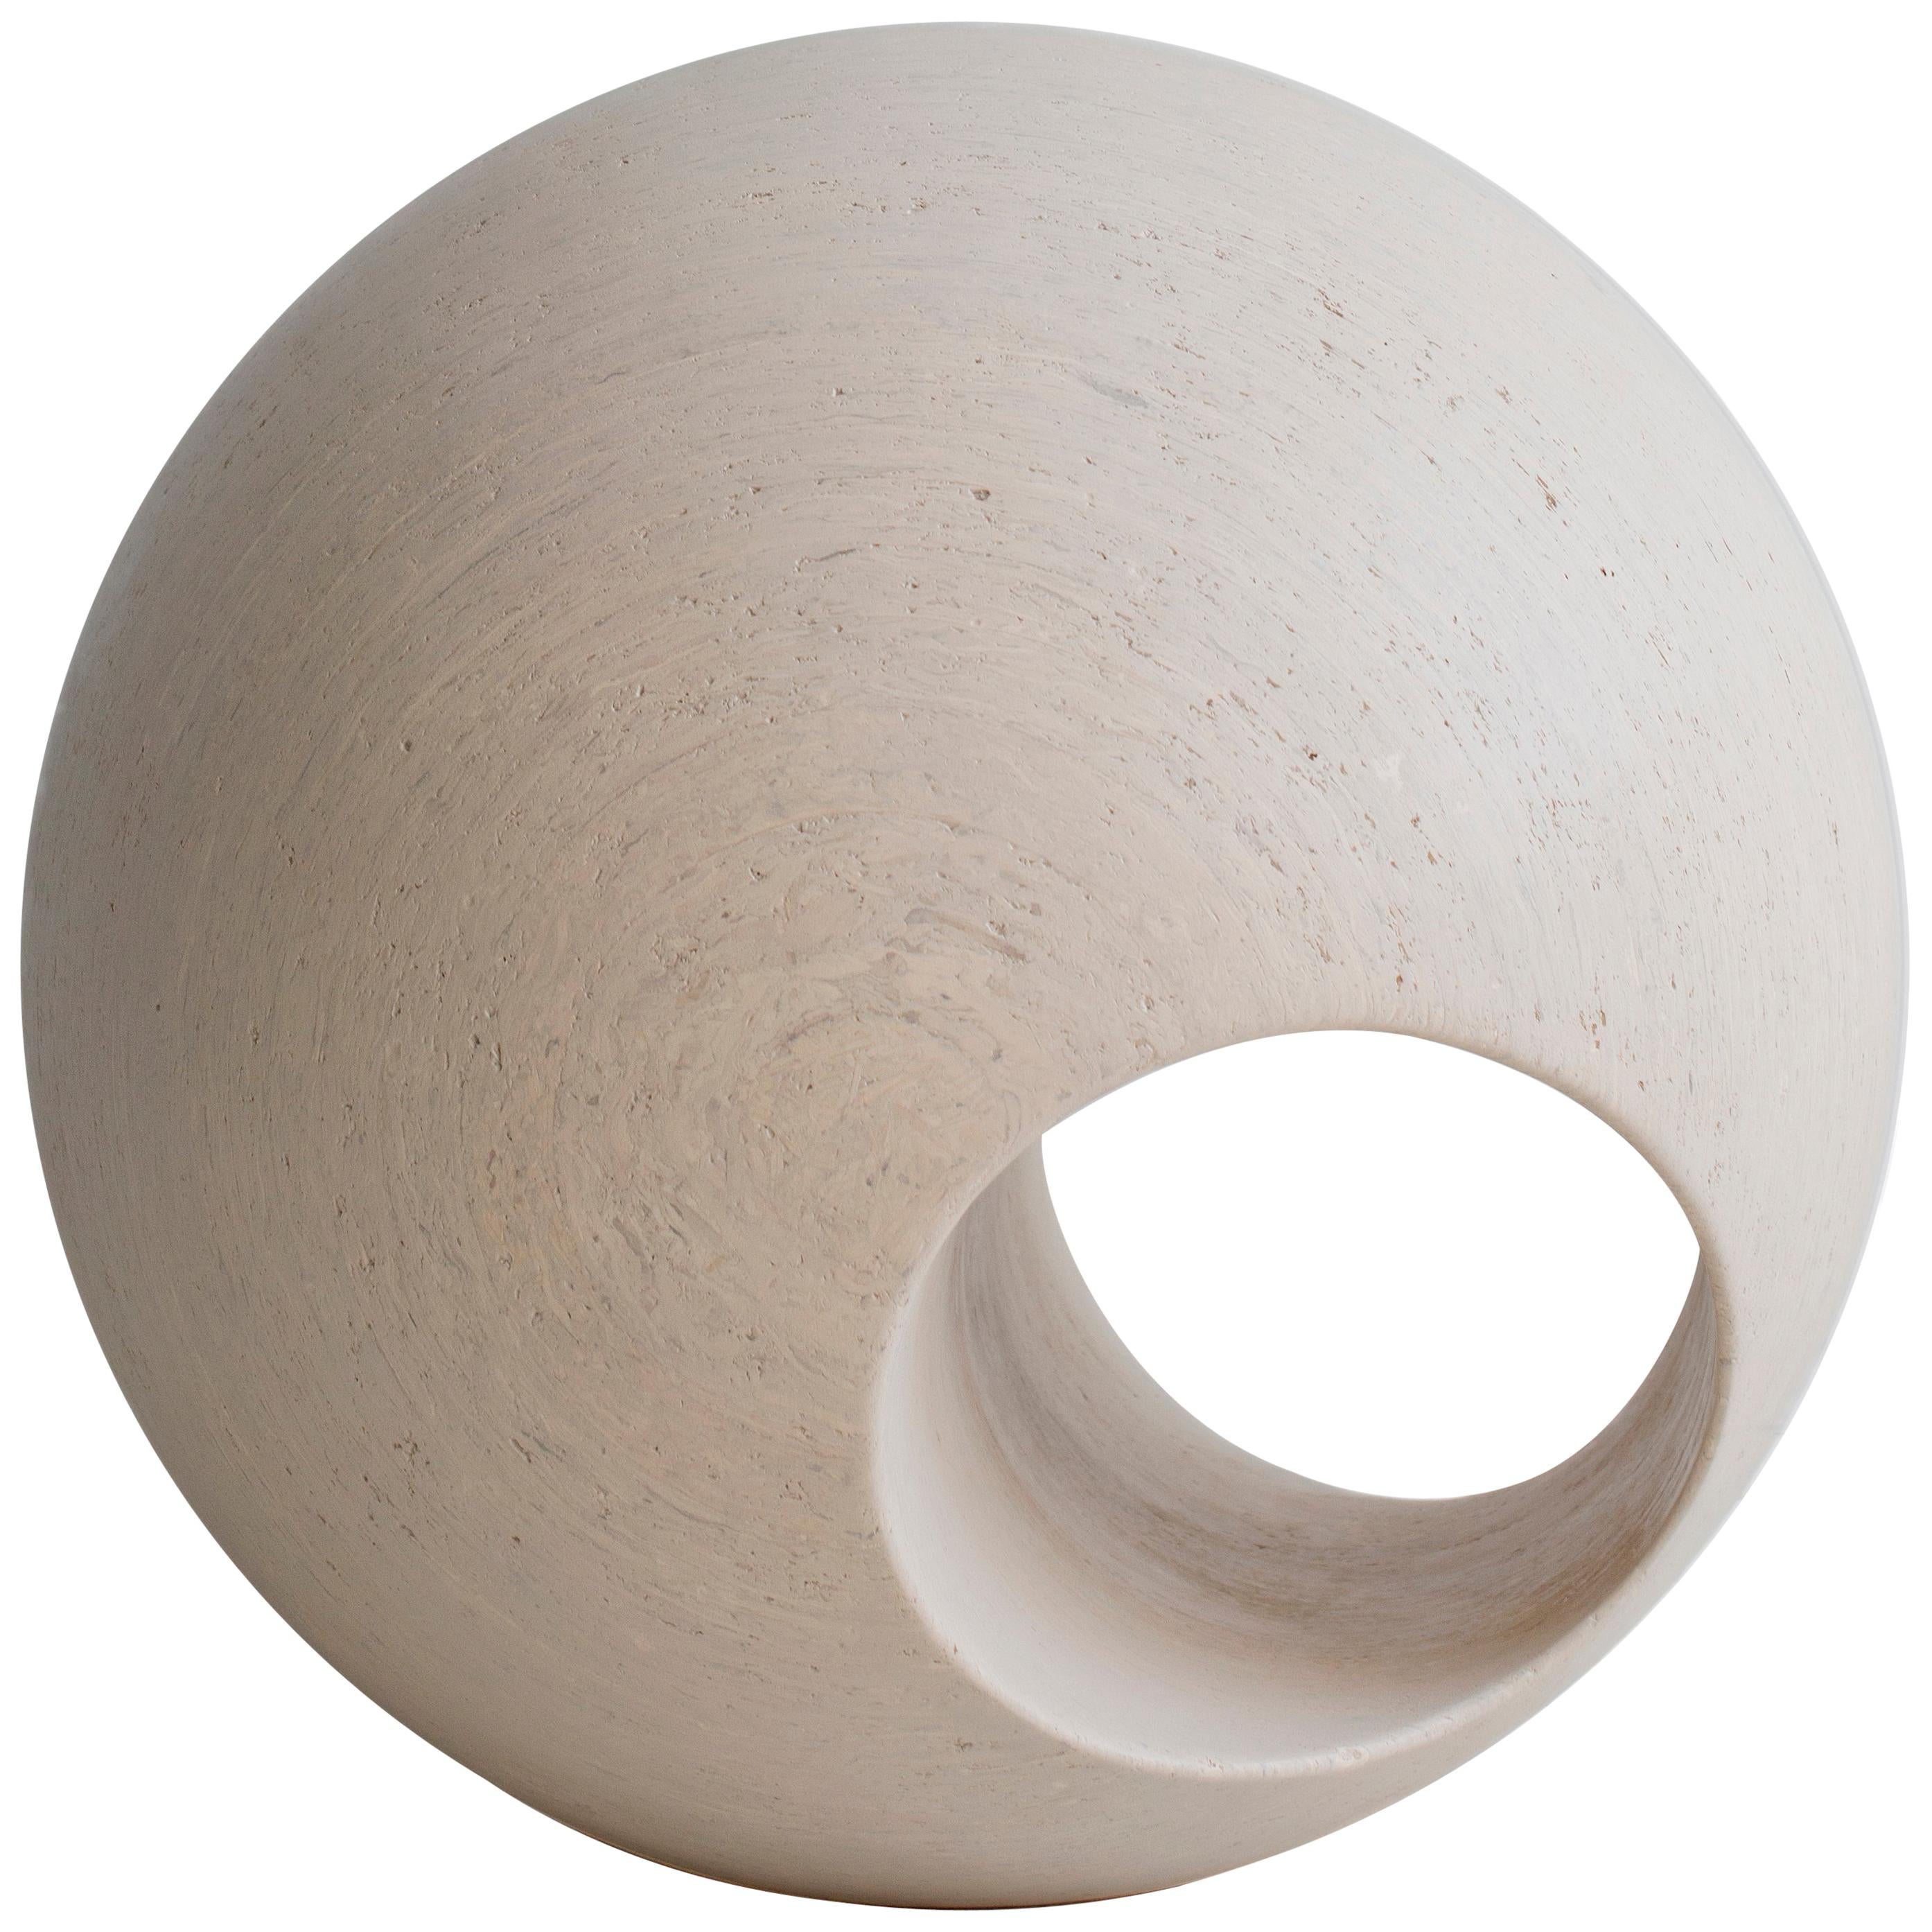 24" Sculptural Wood Sphere in Creamwash by May Furniture